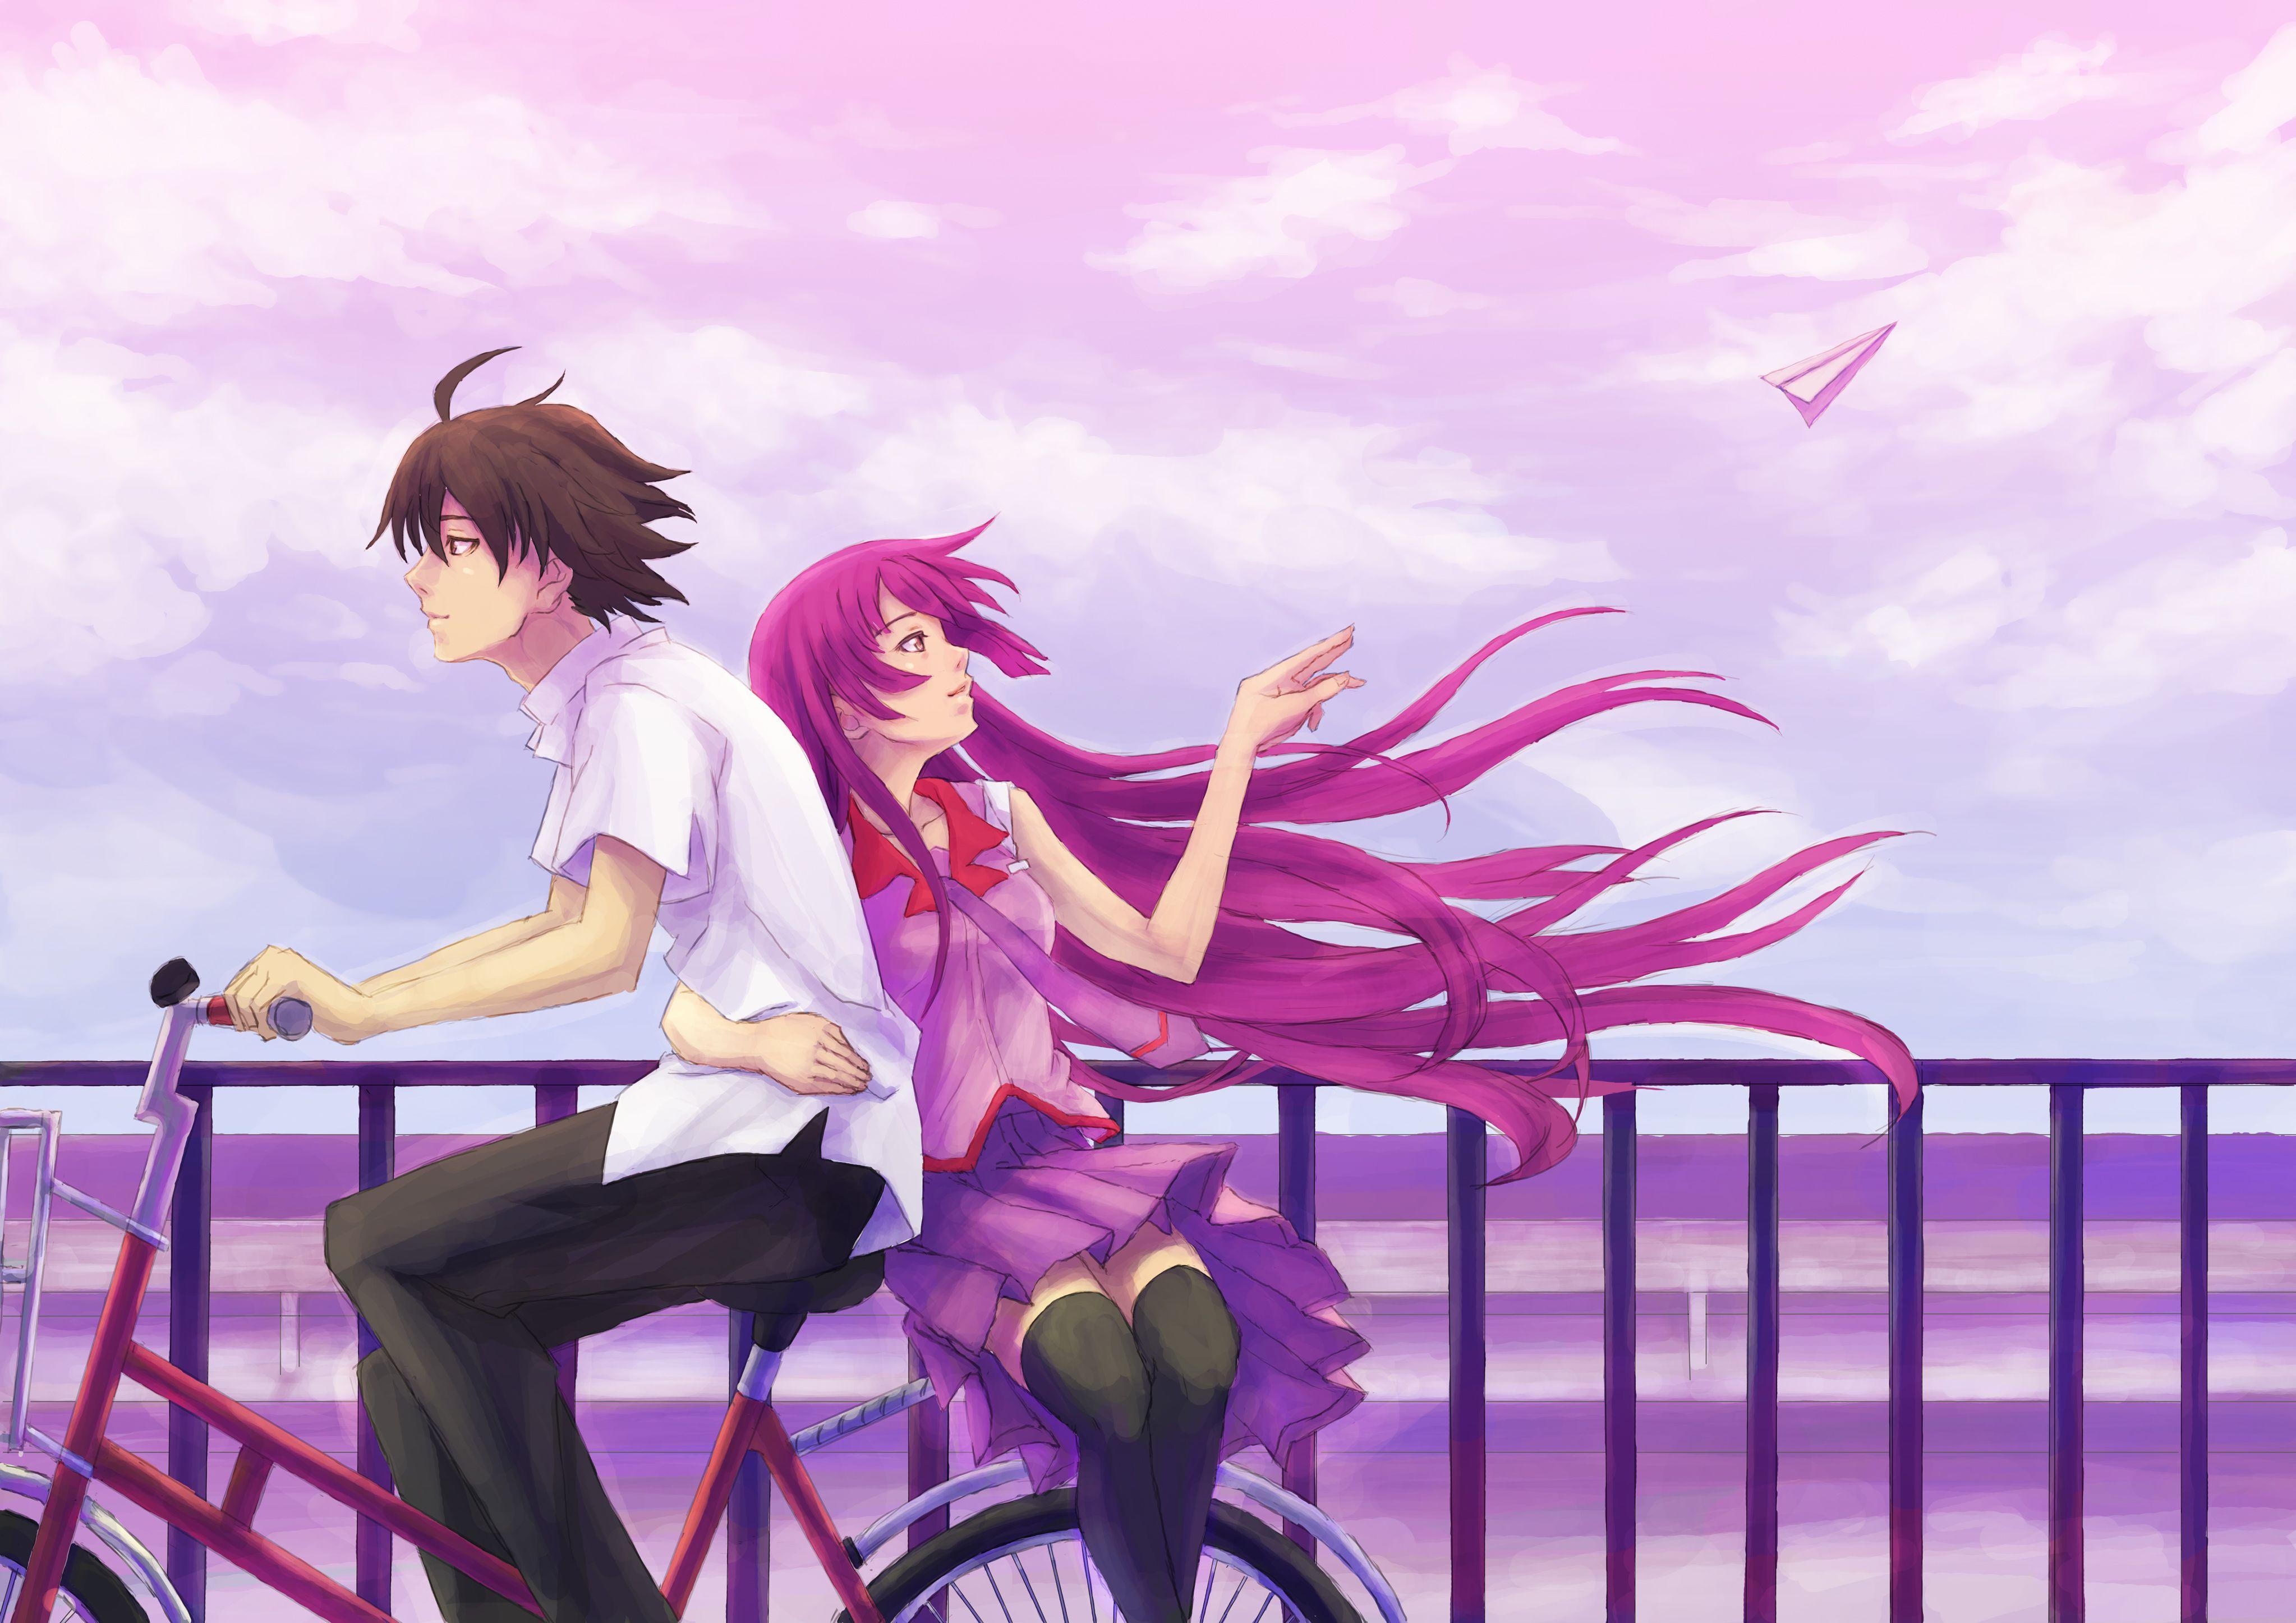 Anime Boy And Girl Wallpapers Wallpaper Cave